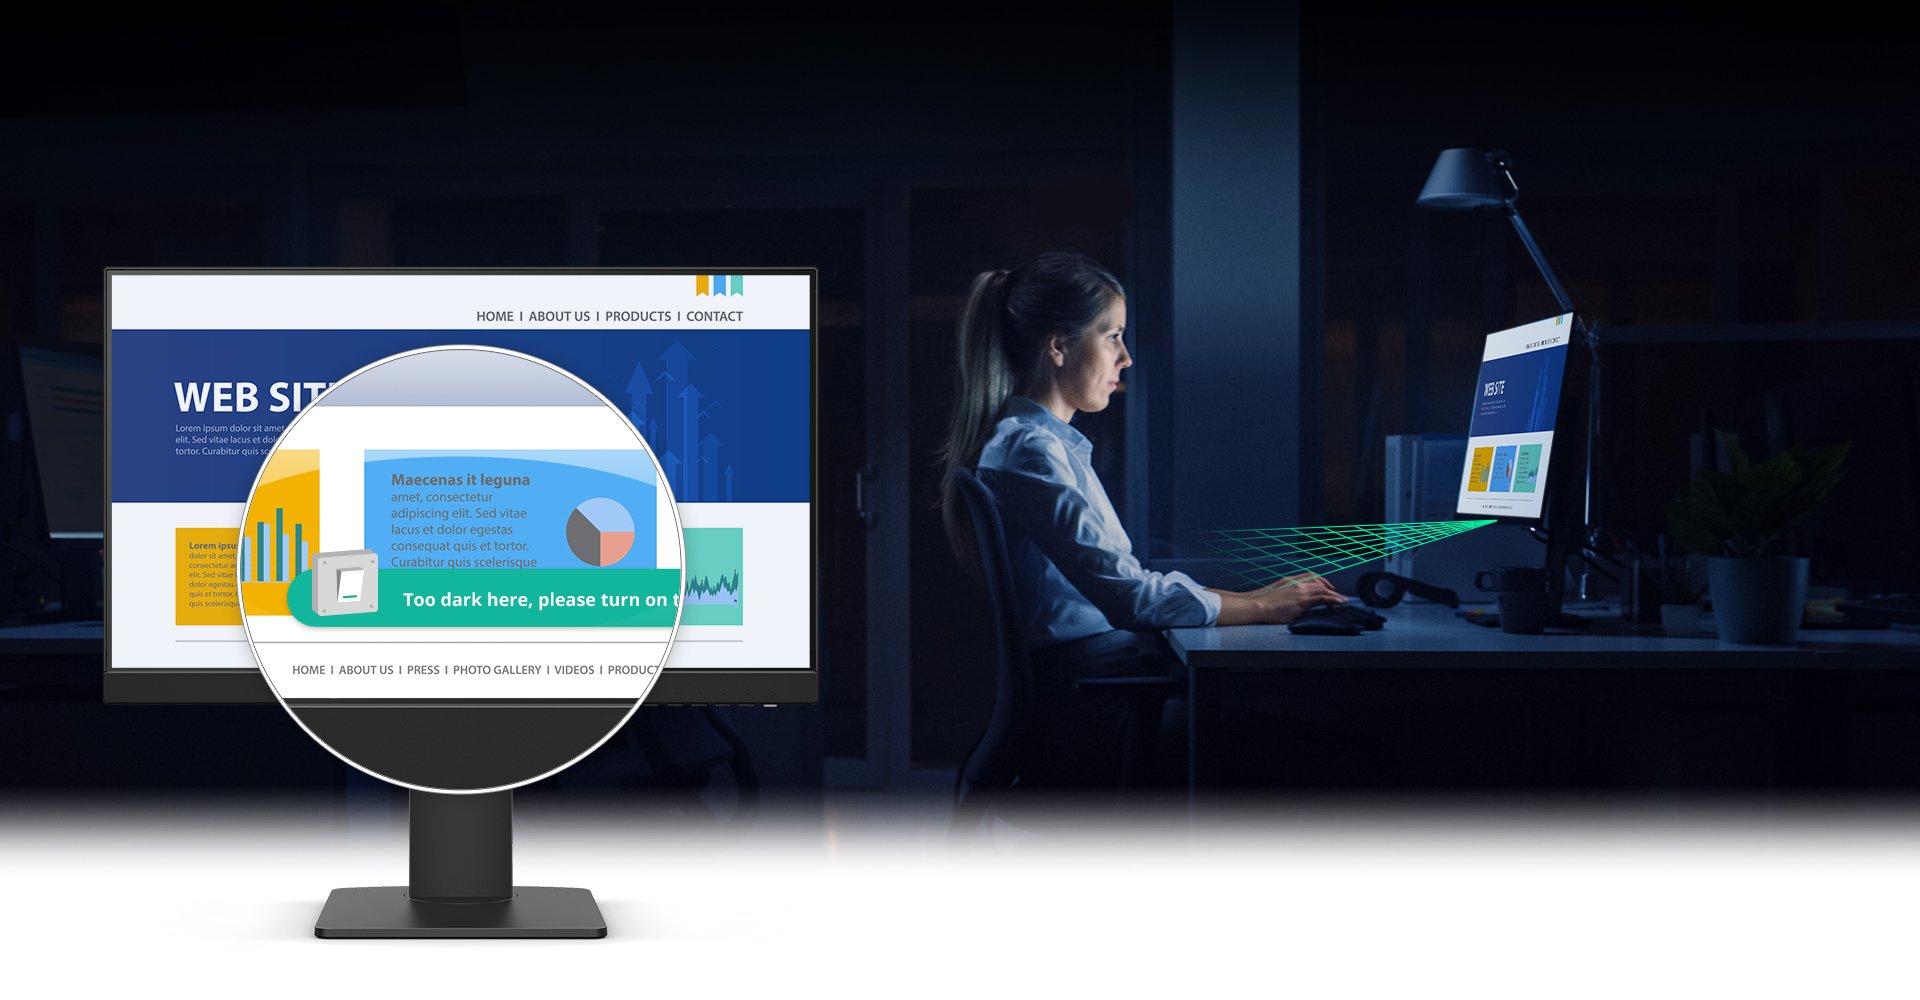 eye-careu notifies you to adjust the lighting when your monitor’s built-in sensor detects dark environments